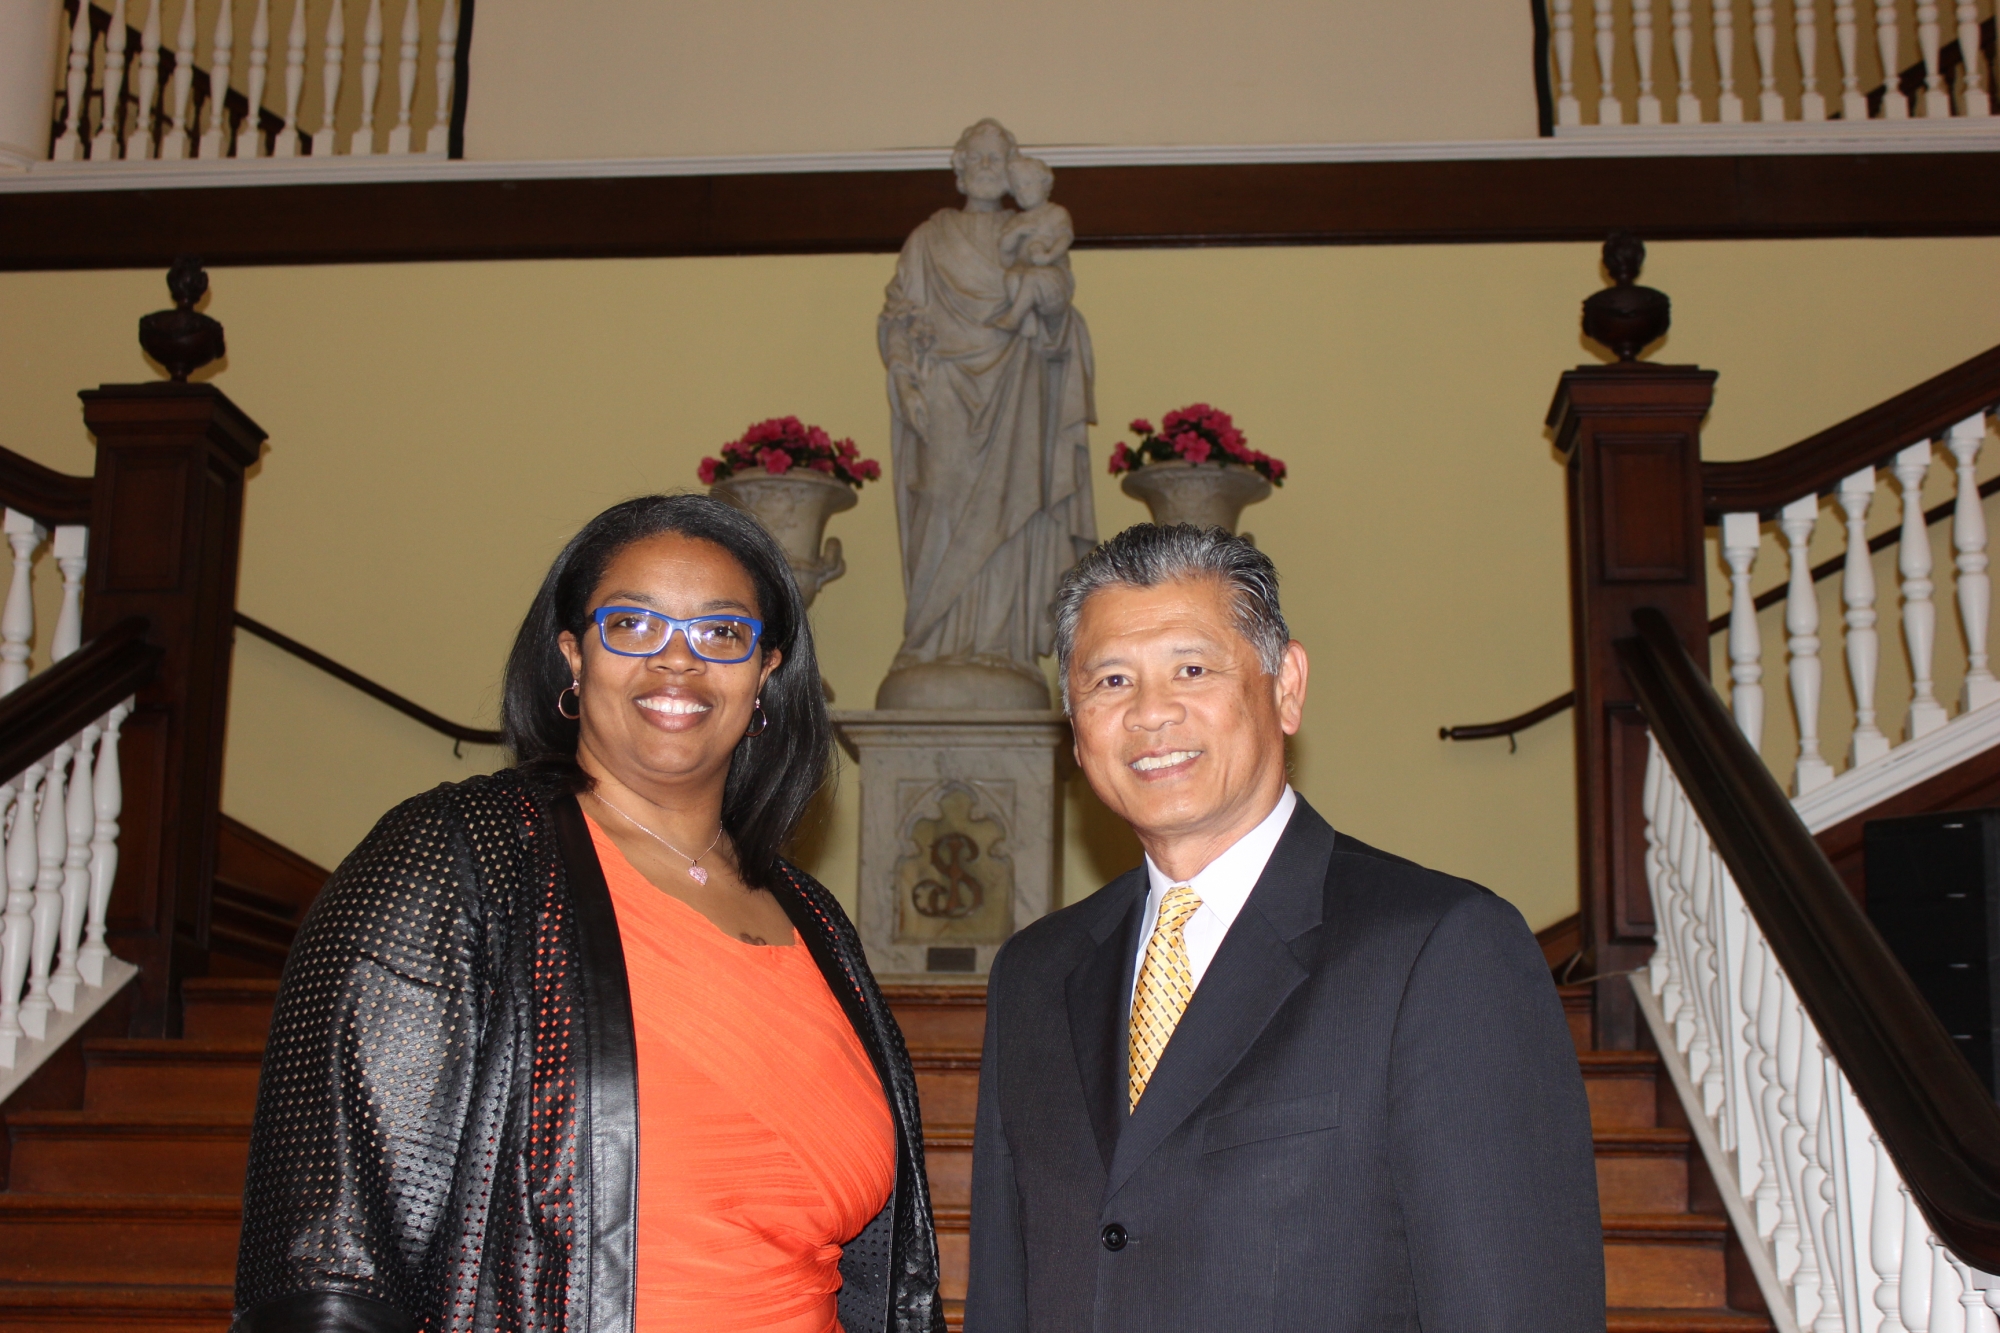 Juliana Mosley, Ph.D., poses with Kenneth Wong prior to his presentation.